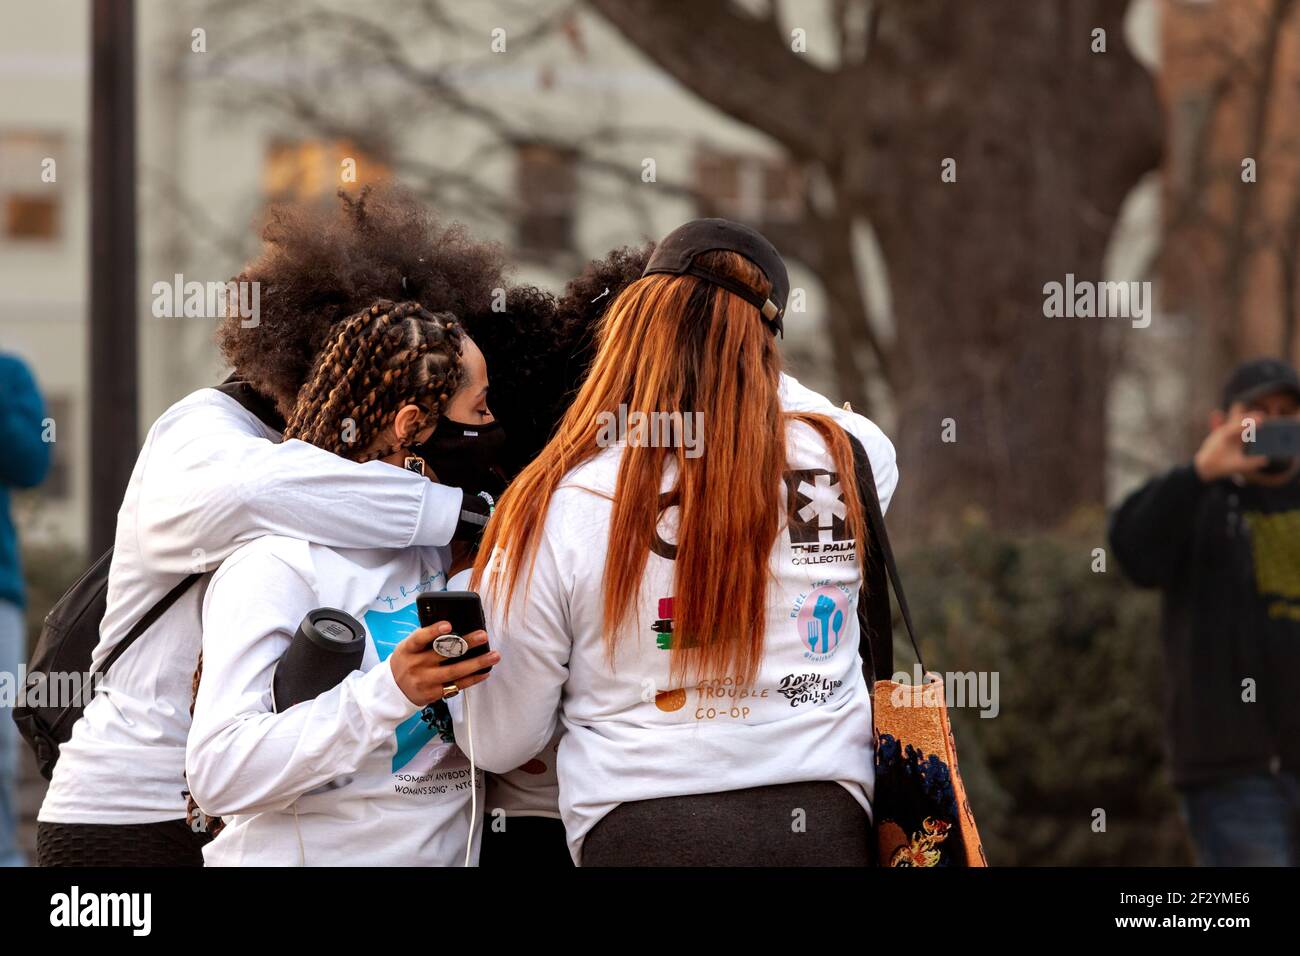 Washington, DC, USA, 13 March, 2021.  Pictured:  Organizers of a candlelight vigil for Breonna Taylor share a group hug.  The vigil marked the one year anniversary of Taylor's killing by Louisville Police officers, and called for them to be held accountable for her death.  Credit: Allison C Bailey/Alamy Live News Stock Photo